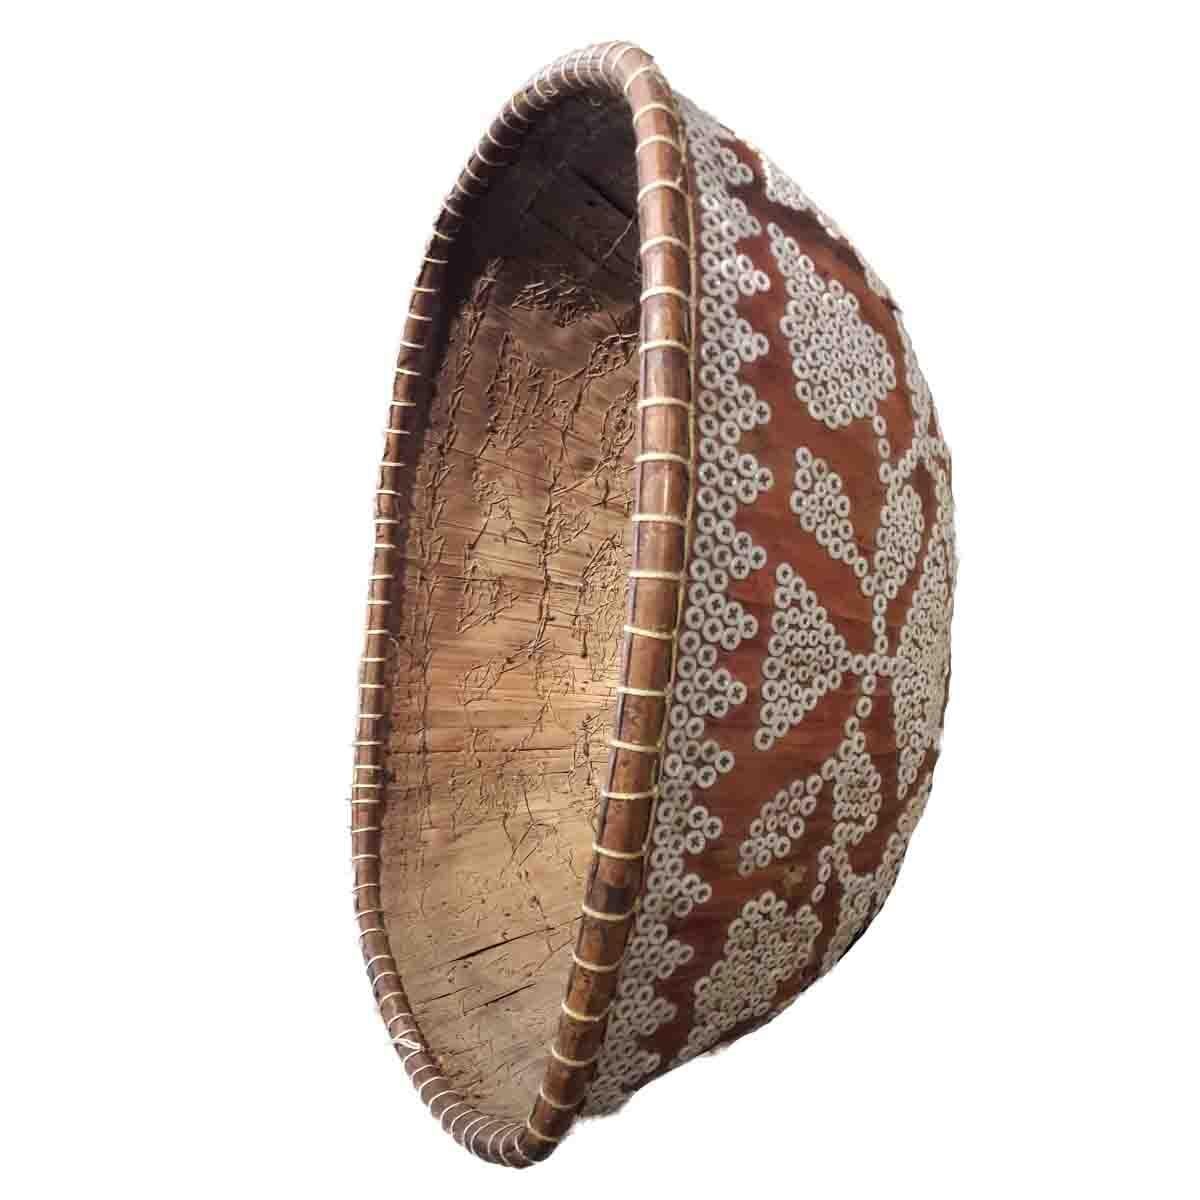 Organic Material Balinese Food Cover Baskets